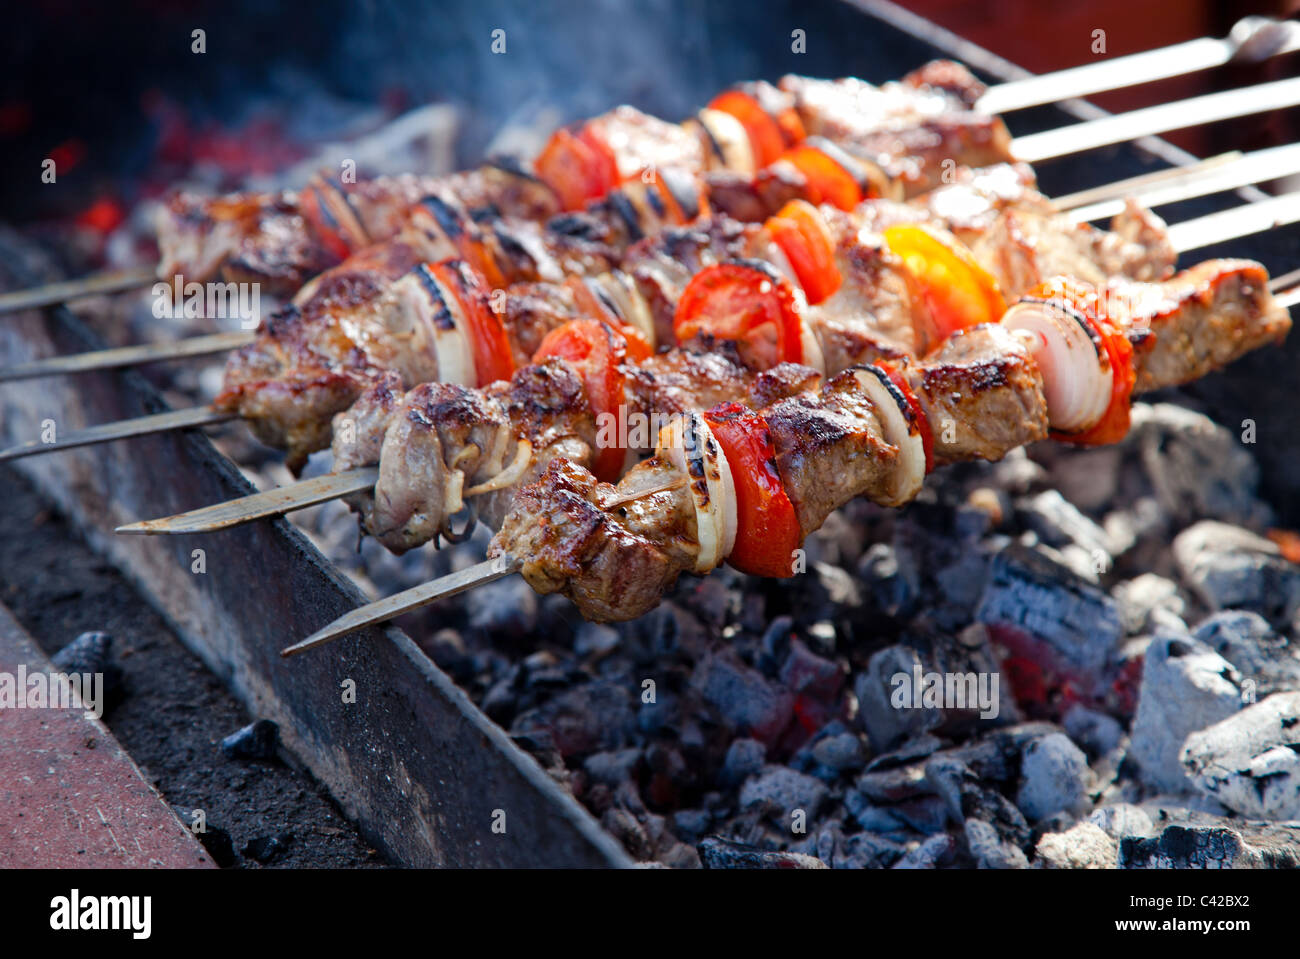 Juicy slices of meat with sauce prepare on fire (shish kebab). Stock Photo